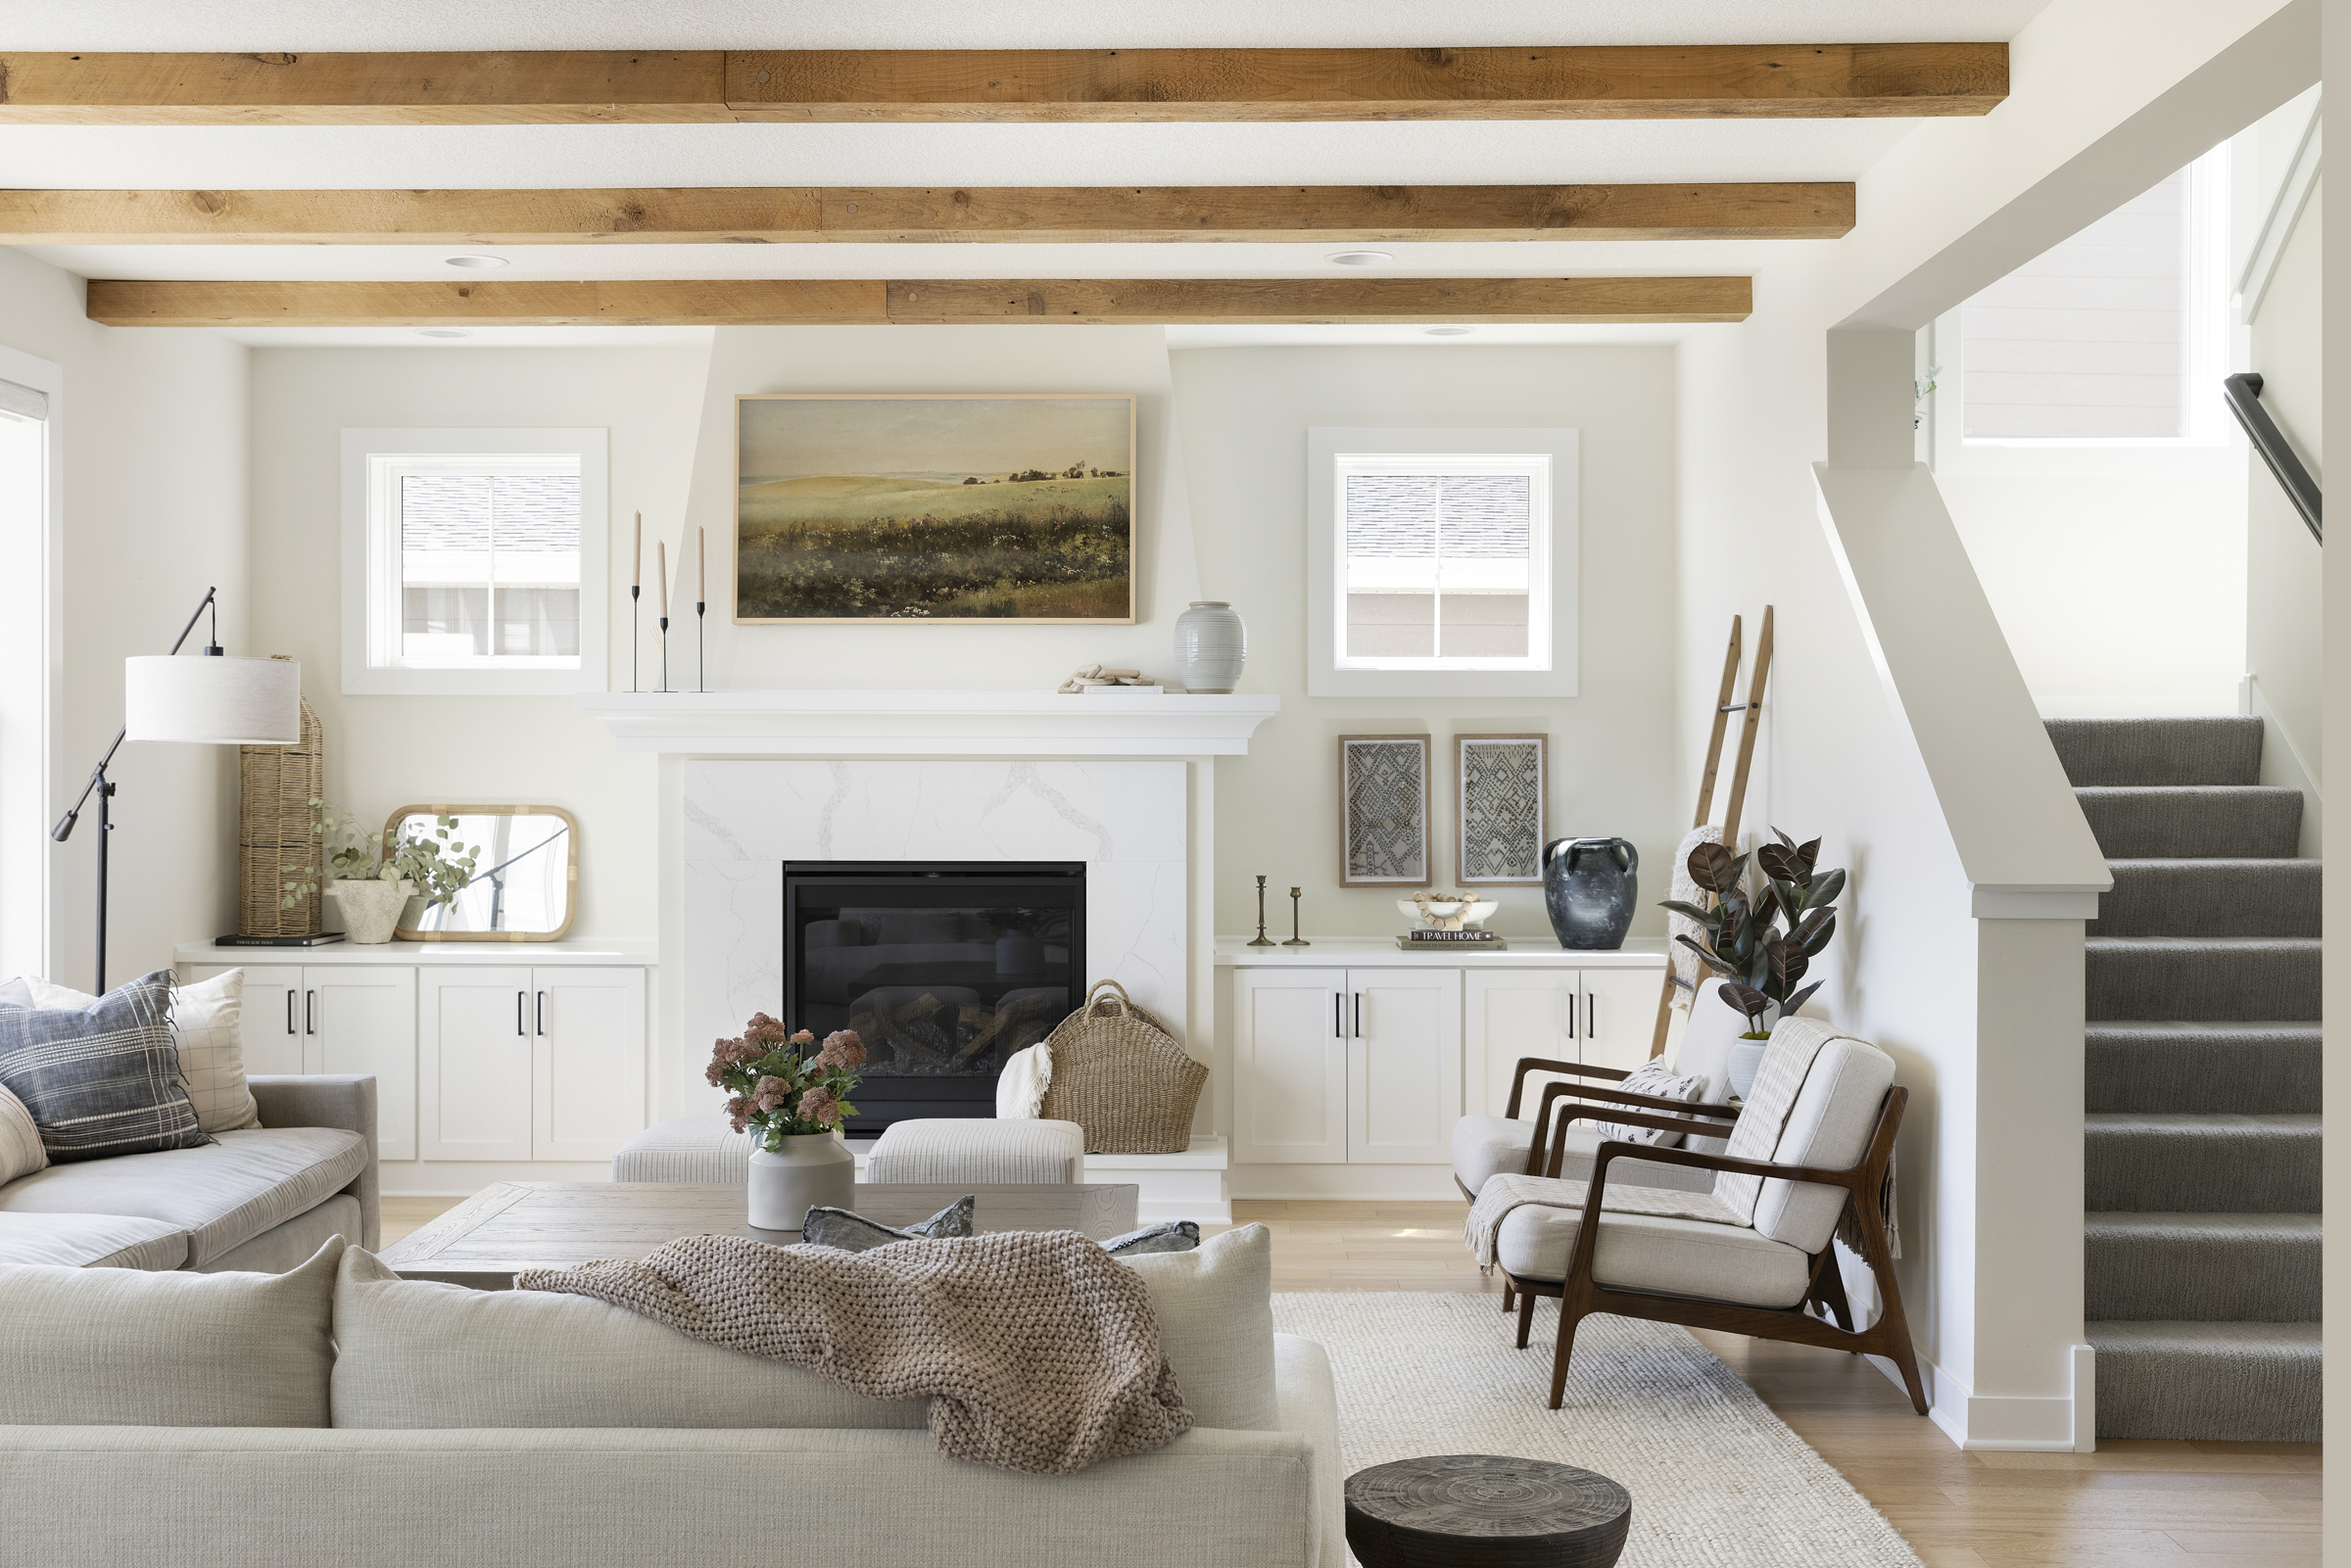 The Art of Styling Homes 1